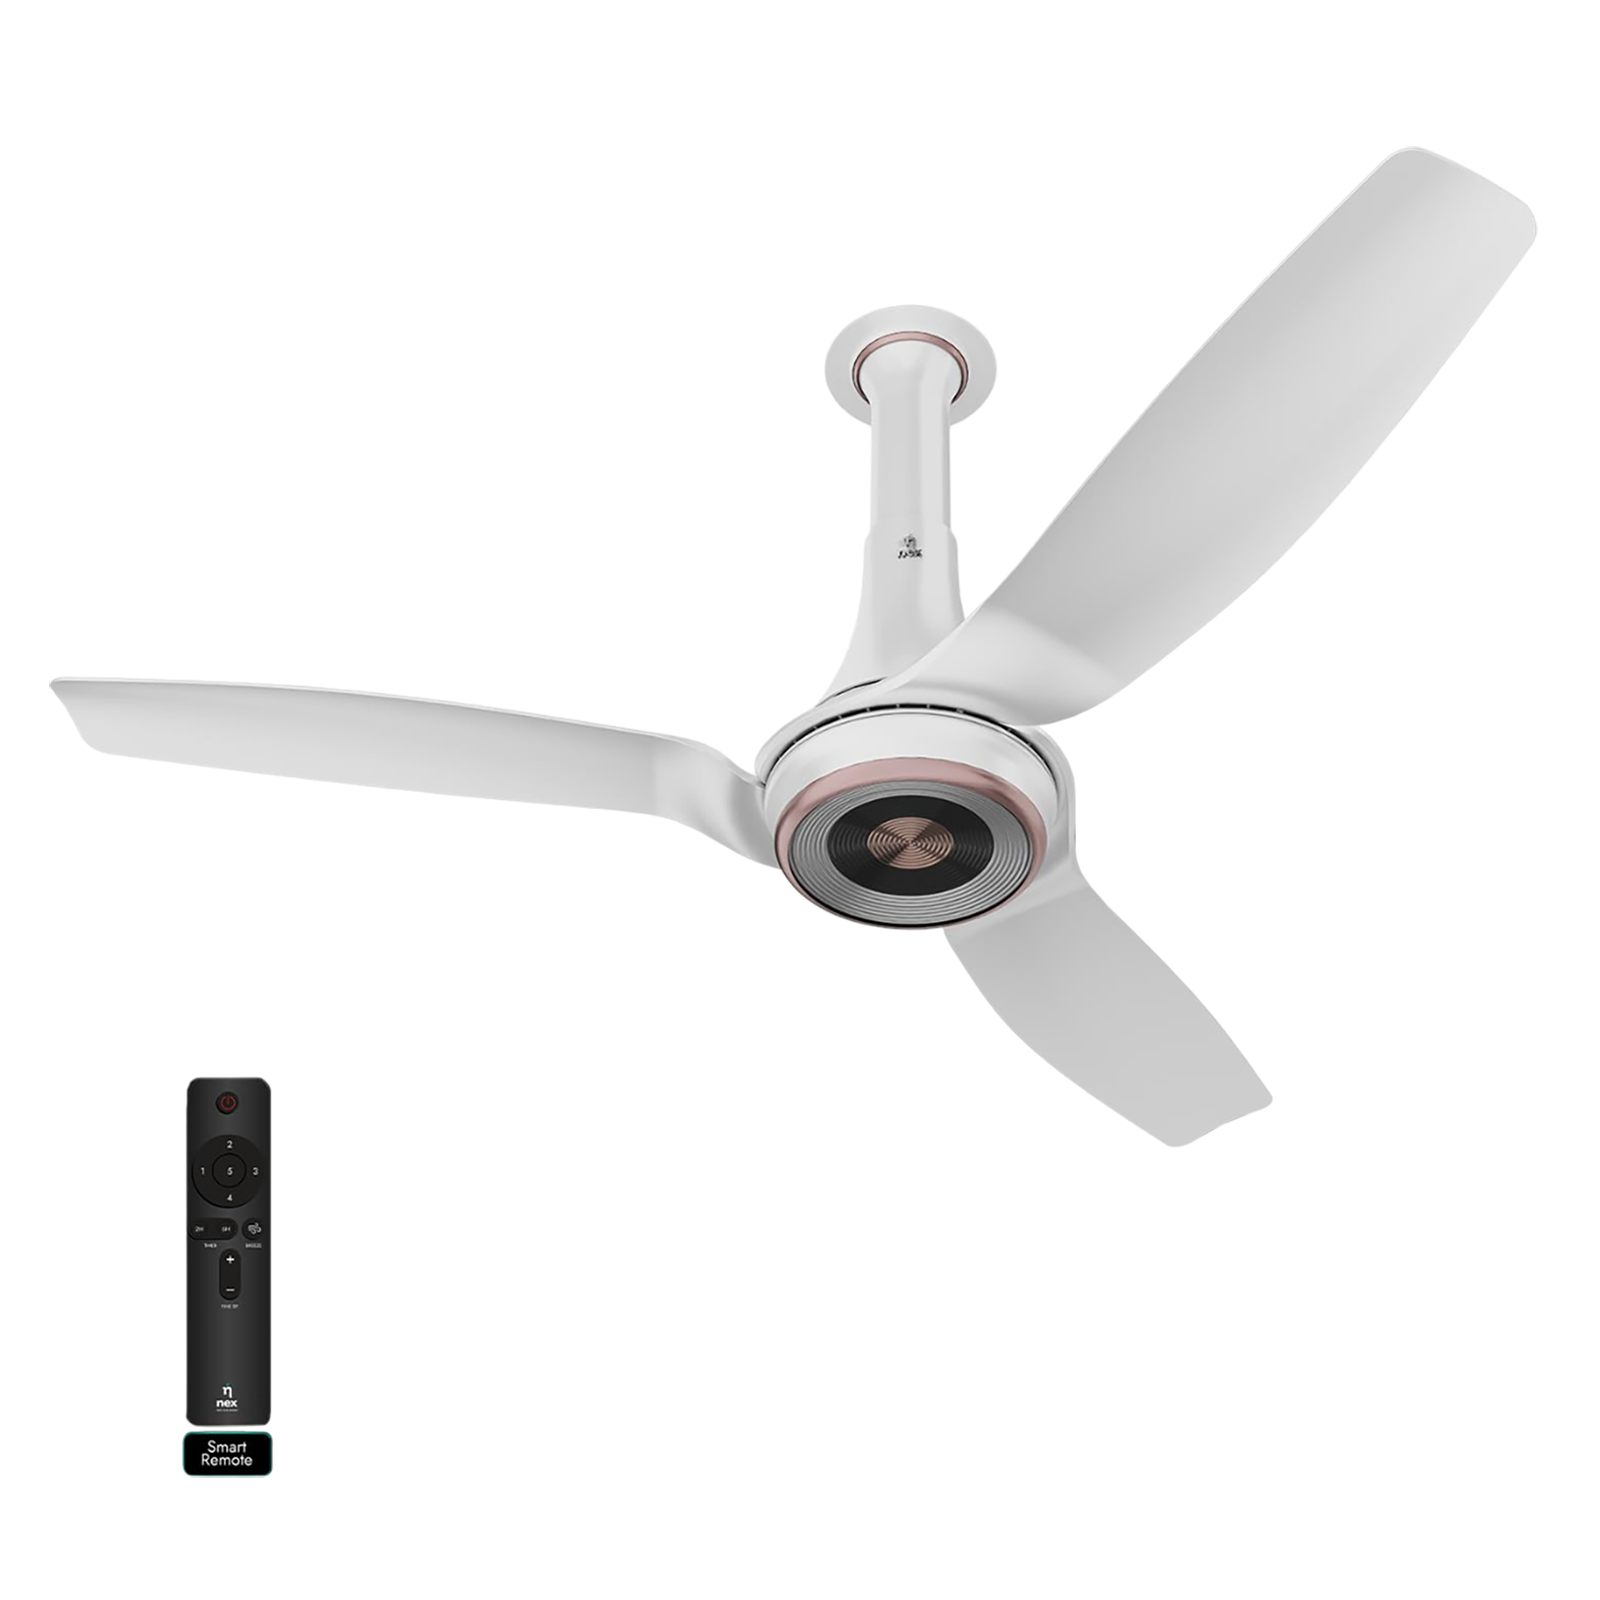 nex Dryft A95 5 Star 1200mm 3 Blade BLDC Motor Smart Ceiling Fan with Remote (Alexa & Google Assistant, Classic White)